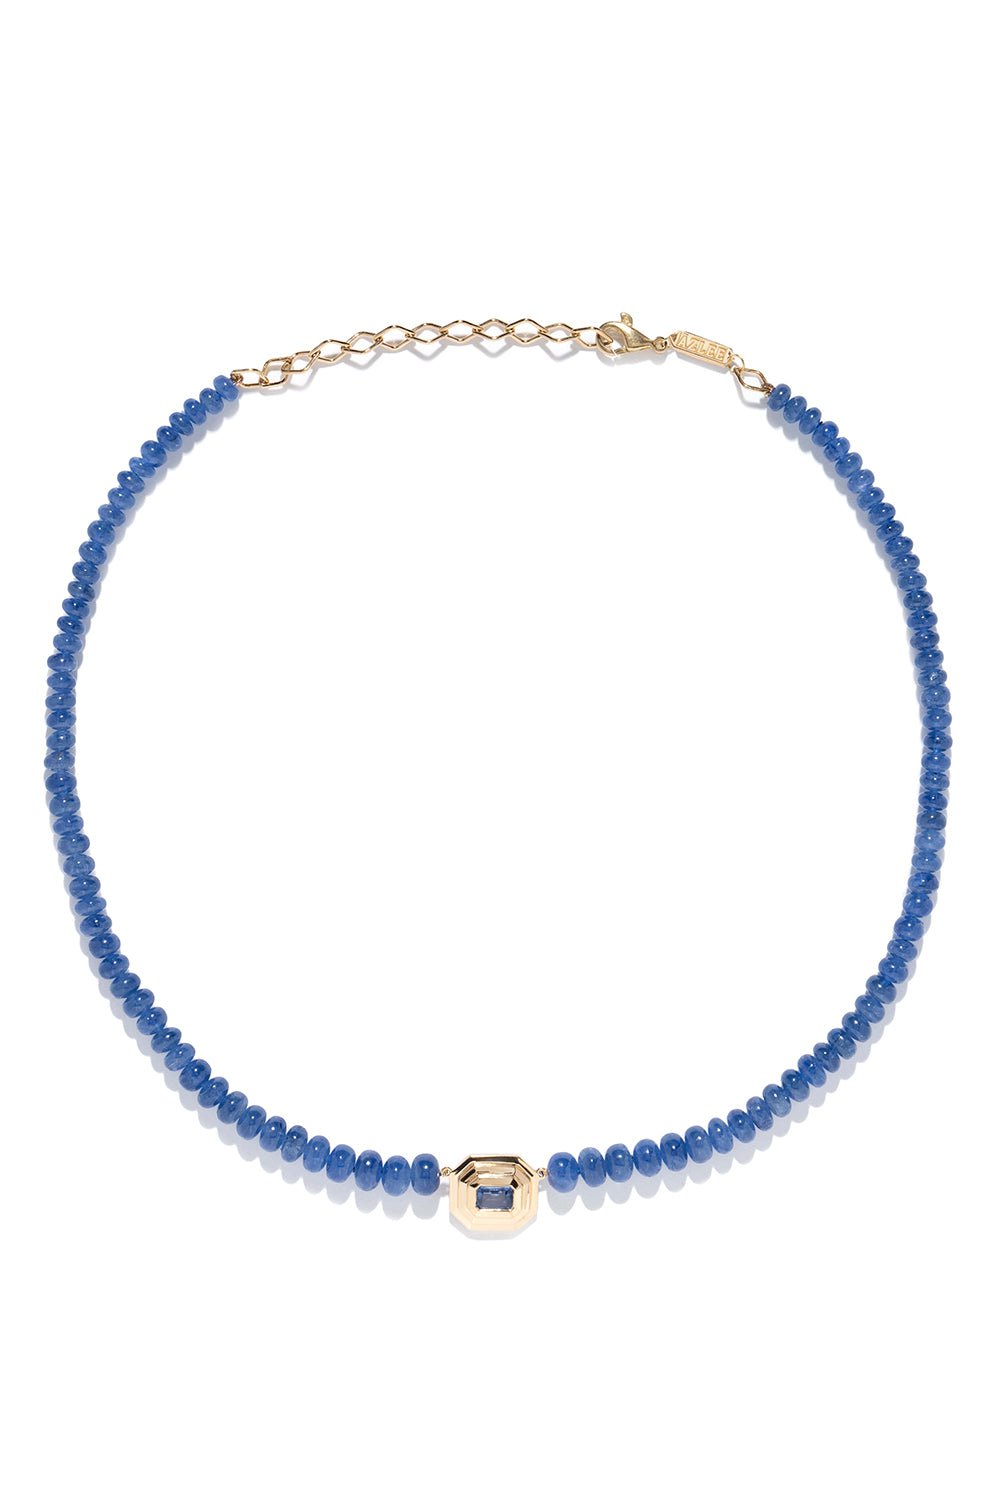 AZLEE-Rich Sapphire Bead Staircase Necklace-YELLOW GOLD